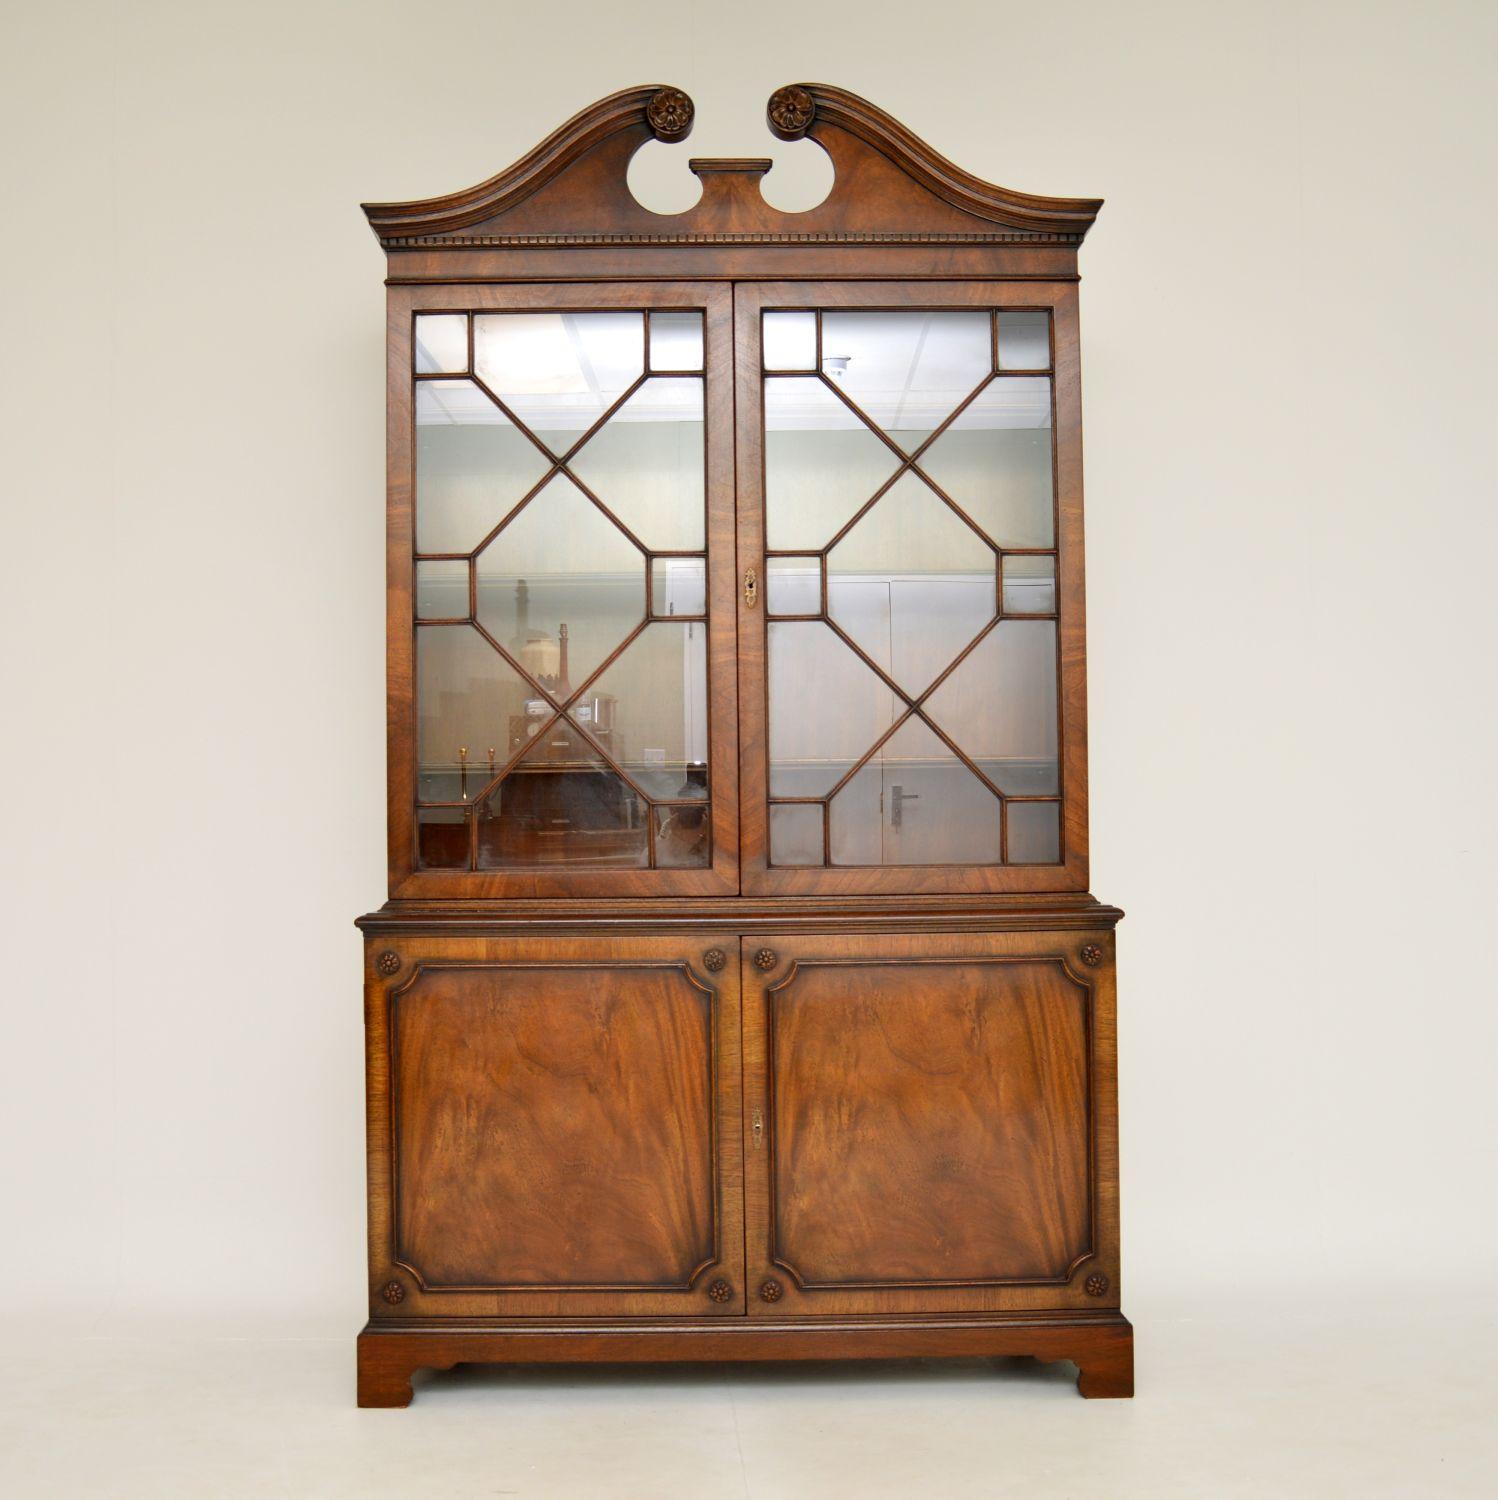 A smart and useful antique Georgian style bookcase. This was made in England, it dates from around the 1930’s period.

The quality is fantastic, the wood has a gorgeous colour tone and lovely grain patterns. The top has a beautifully shaped swan